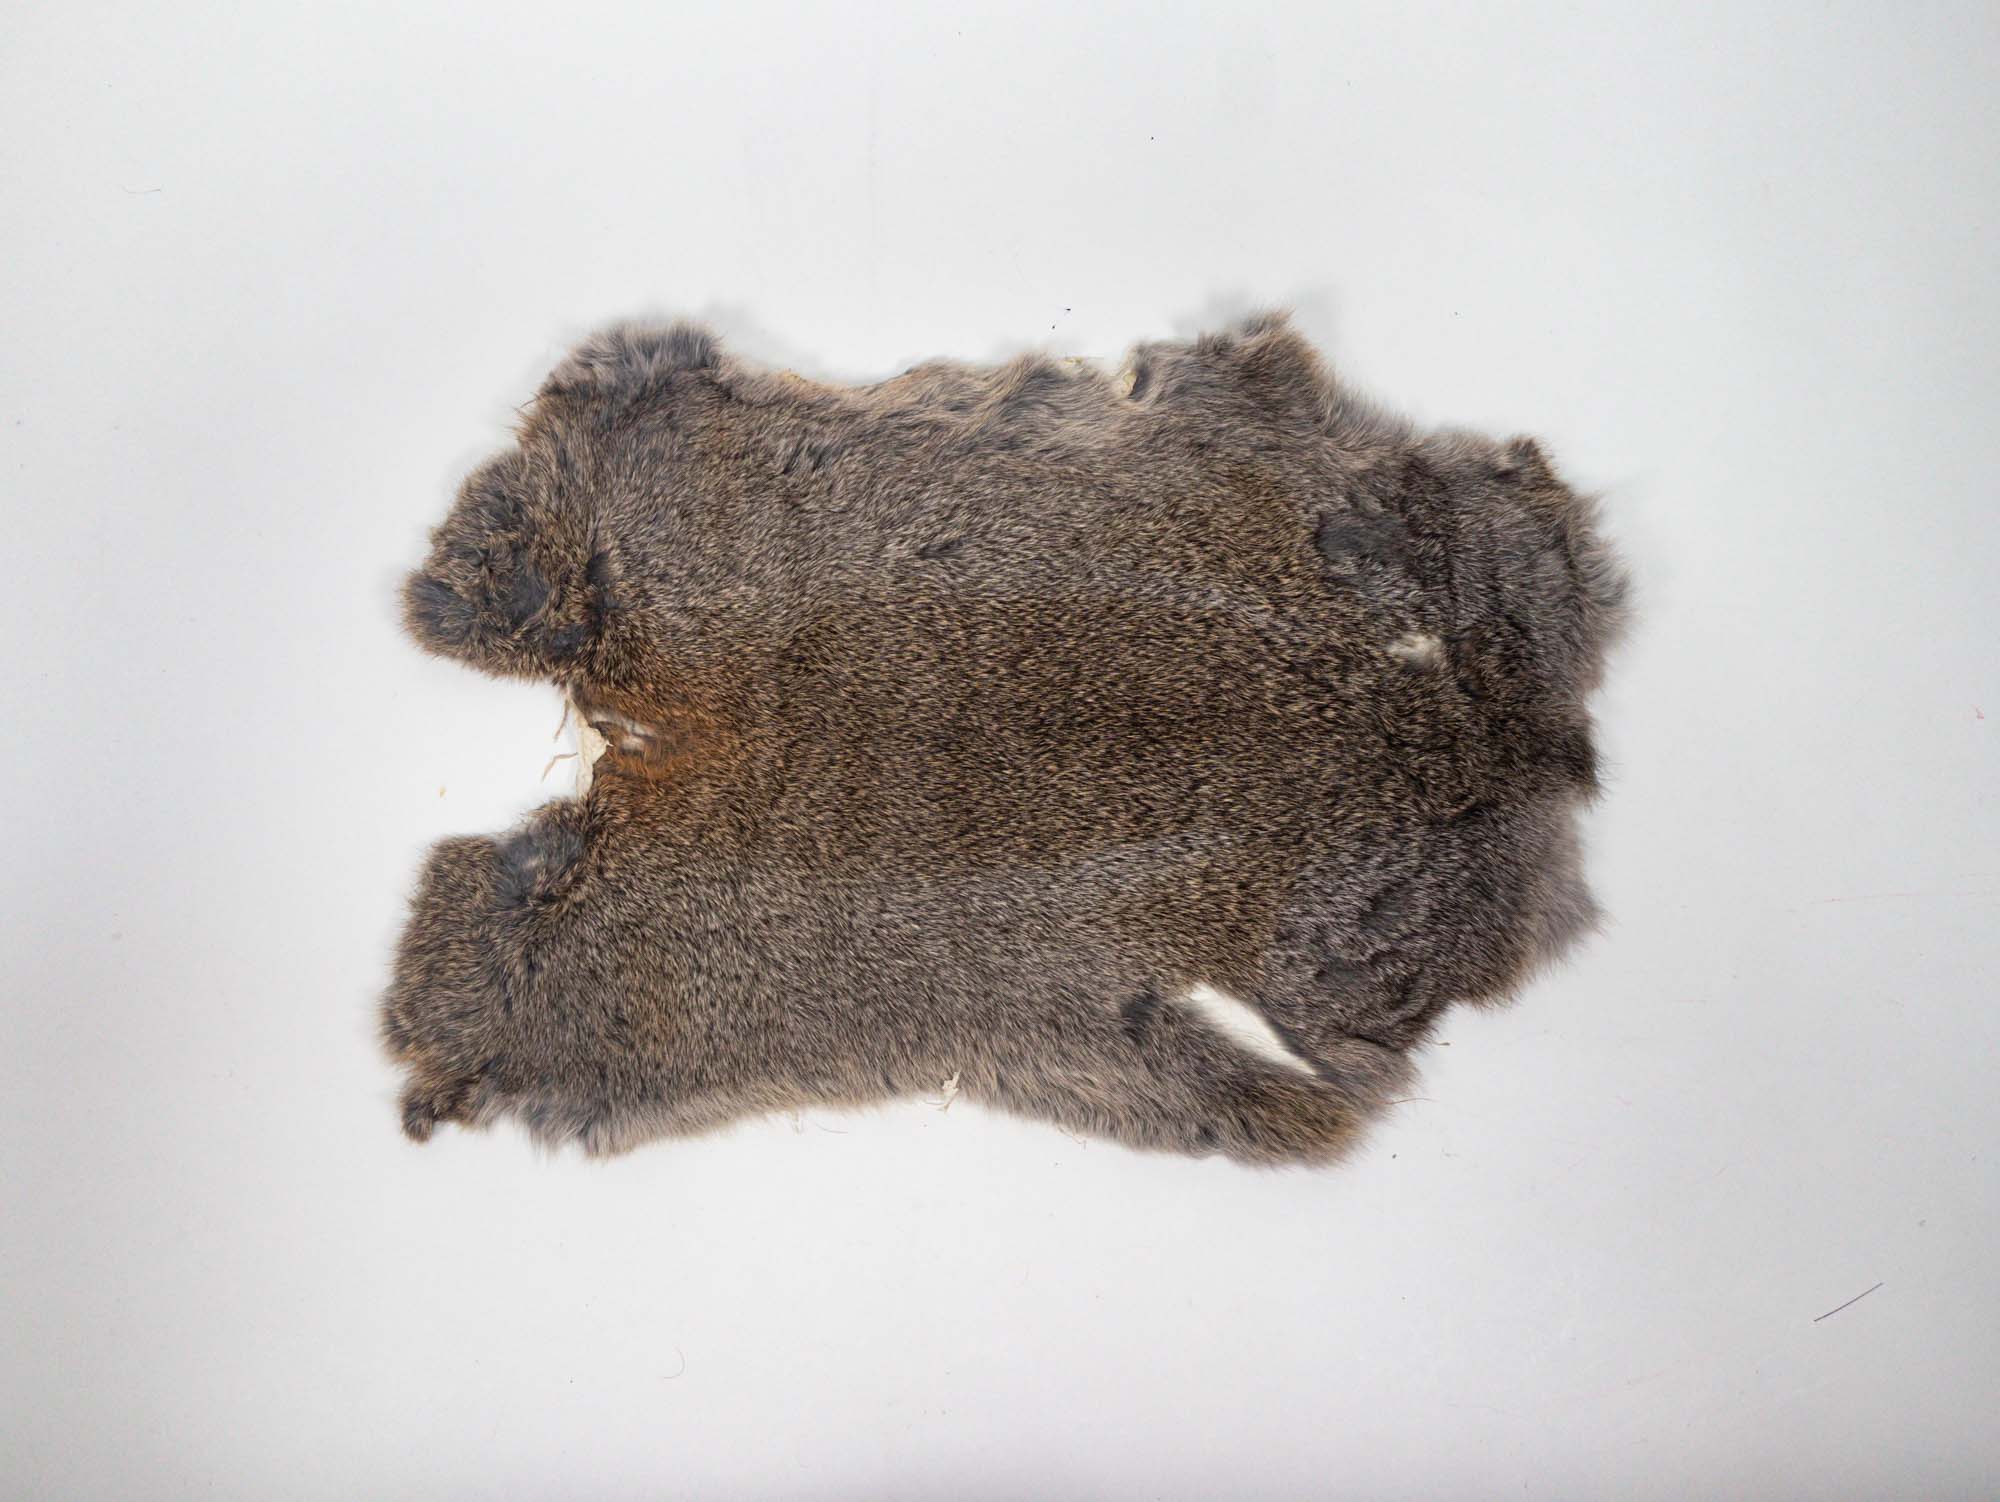 Assorted Natural Rabbit Fur Pelts for sewing, crafting, gift